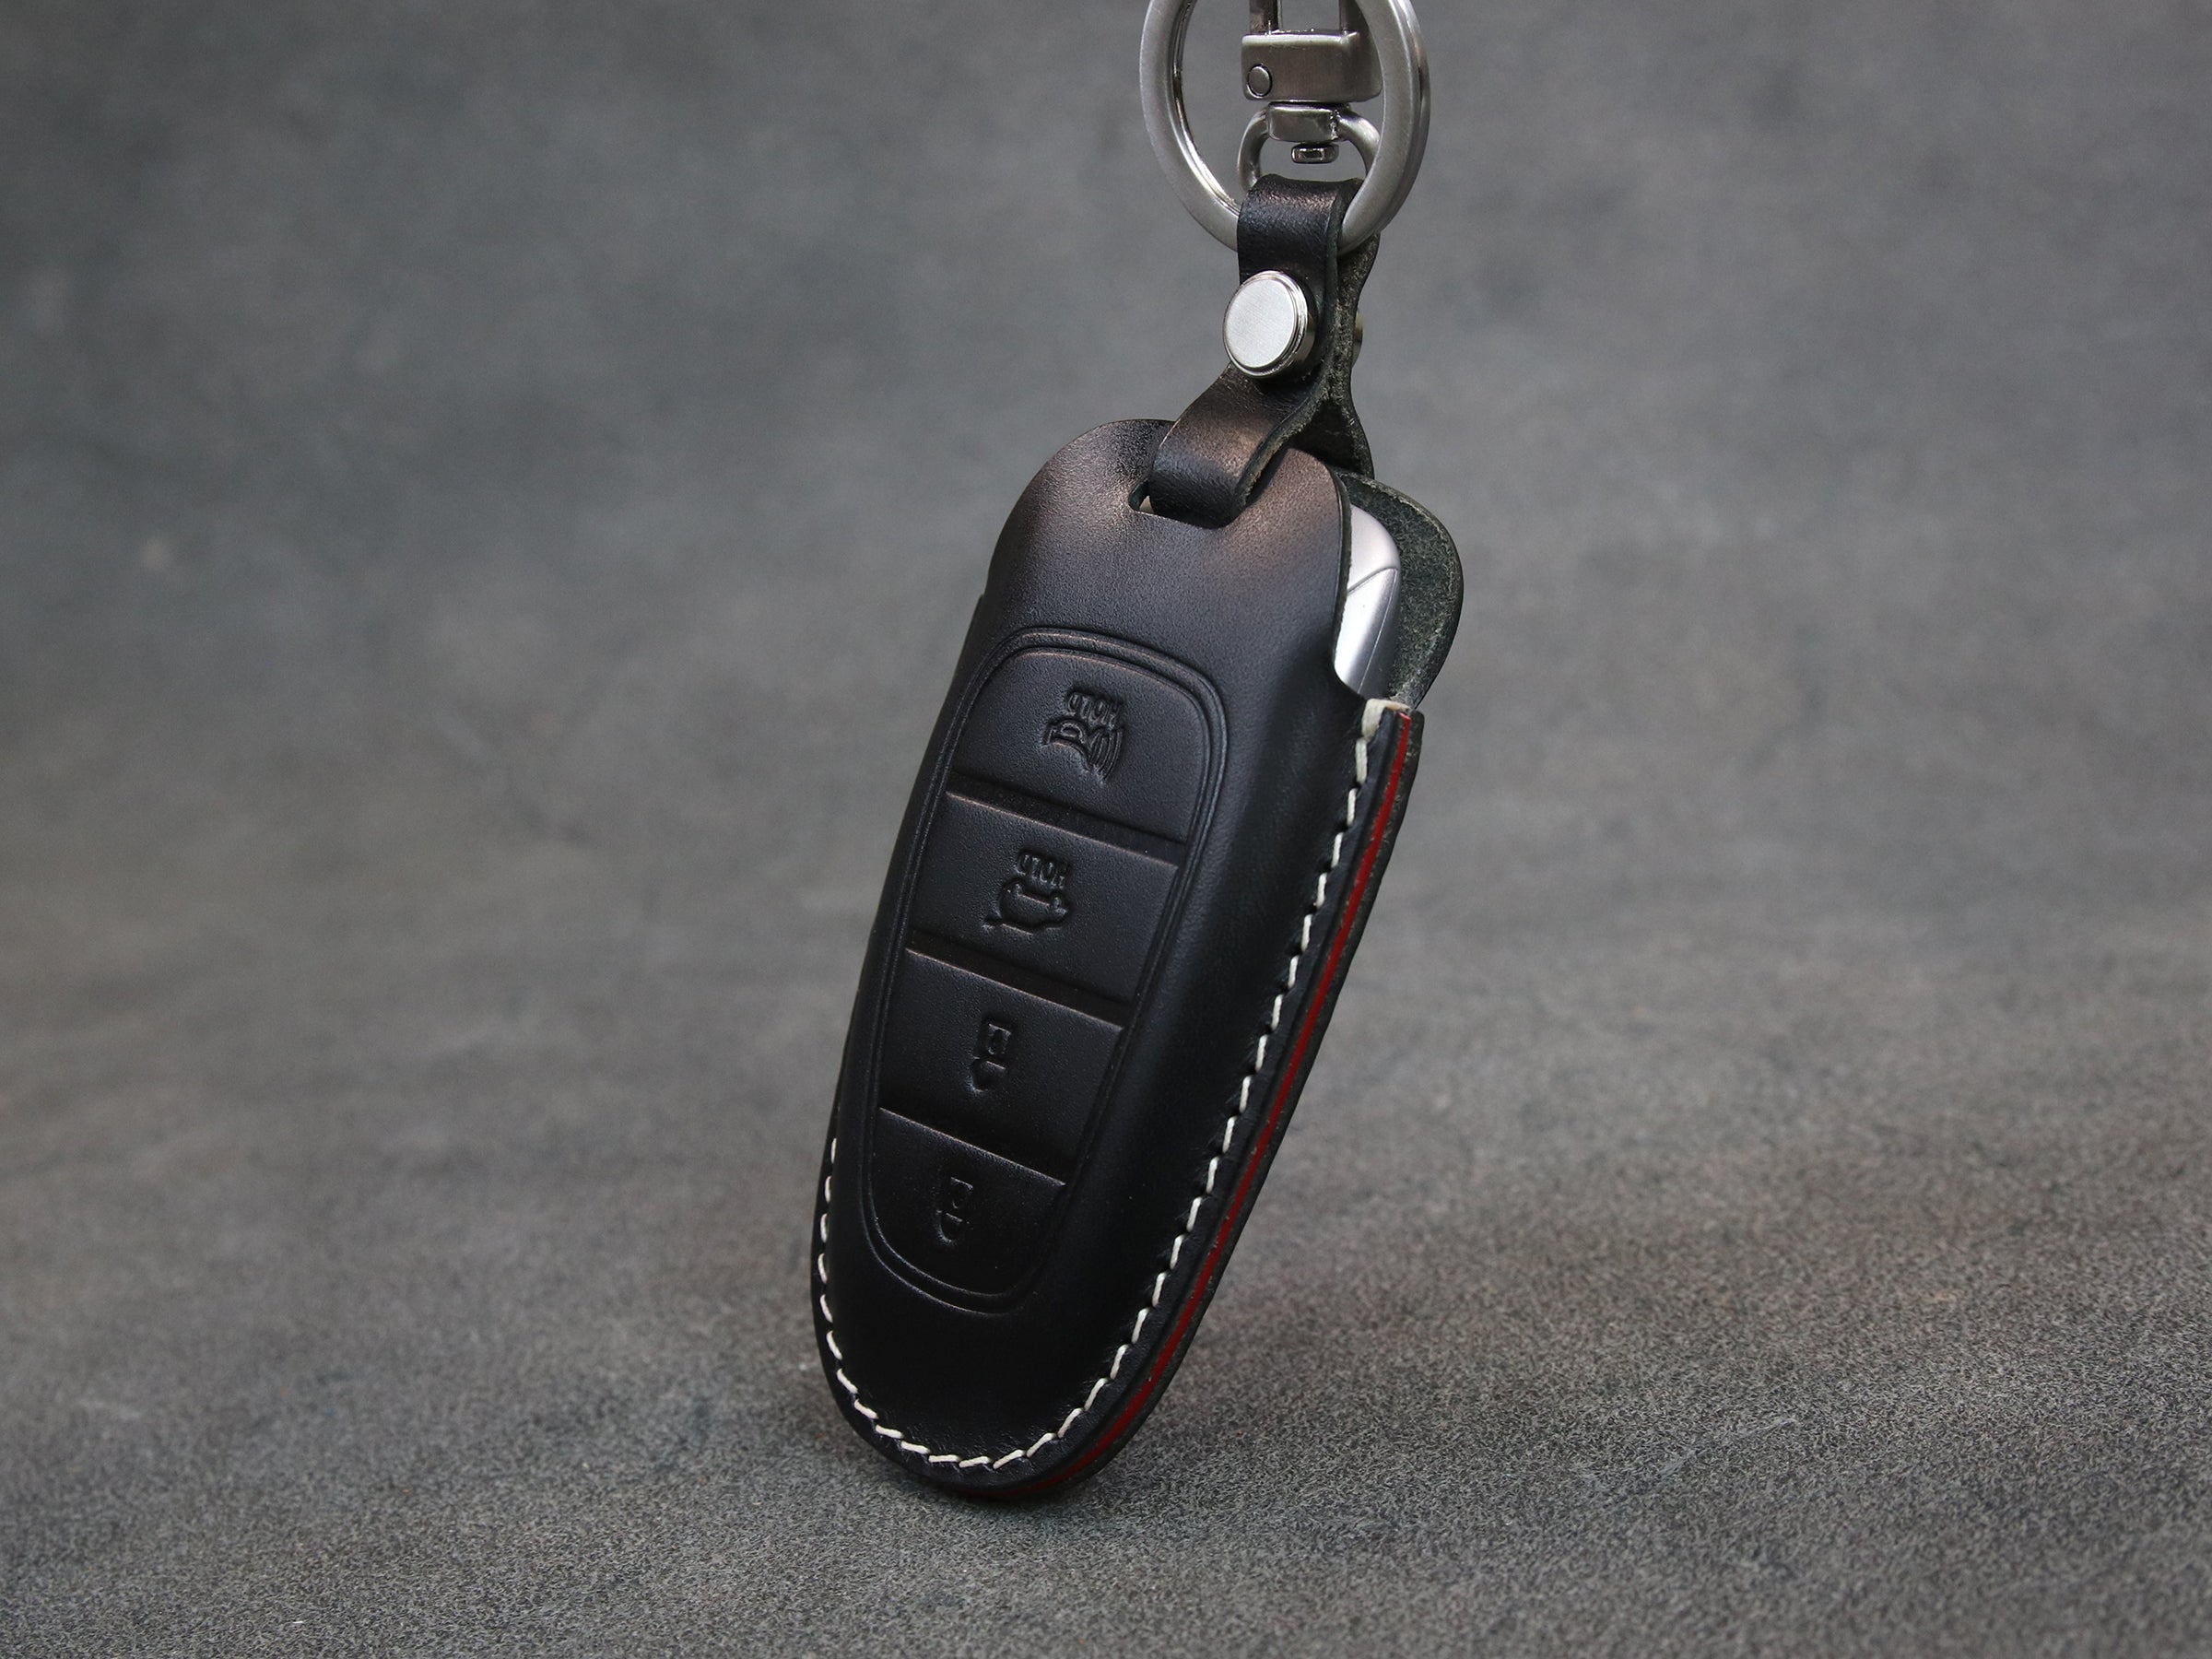 Key Cover for Hyundai With 3 Buttons - Mr Key